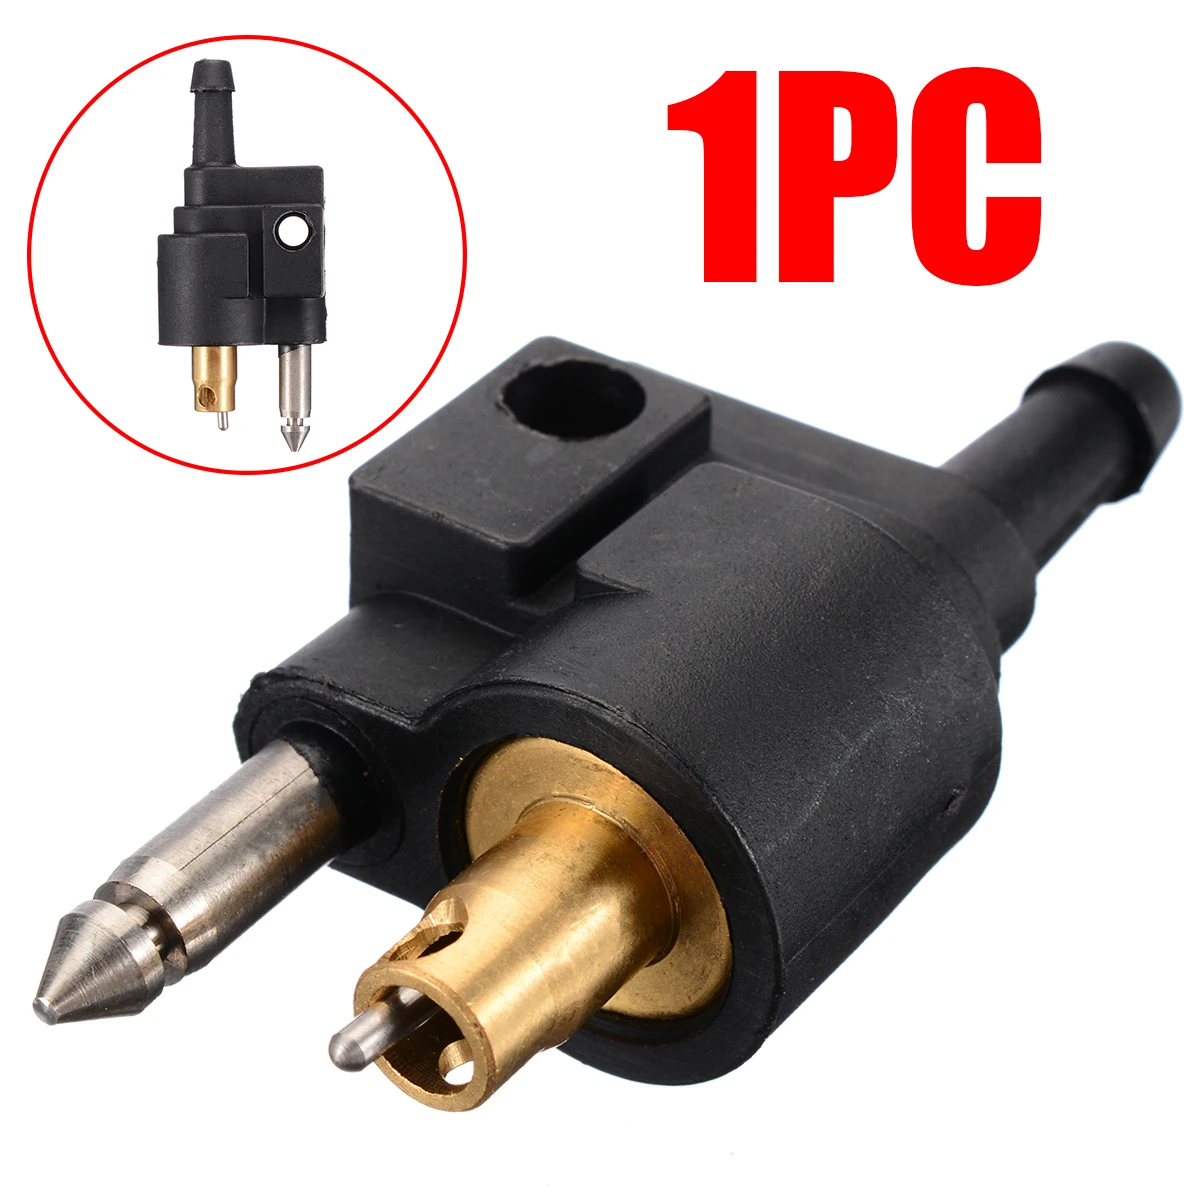 1pcs Outboard Engine Fuel Line Connector Fits 1/4" Hose Line For Yamaha Outboard Motor Fuel Pipe 6mm Male